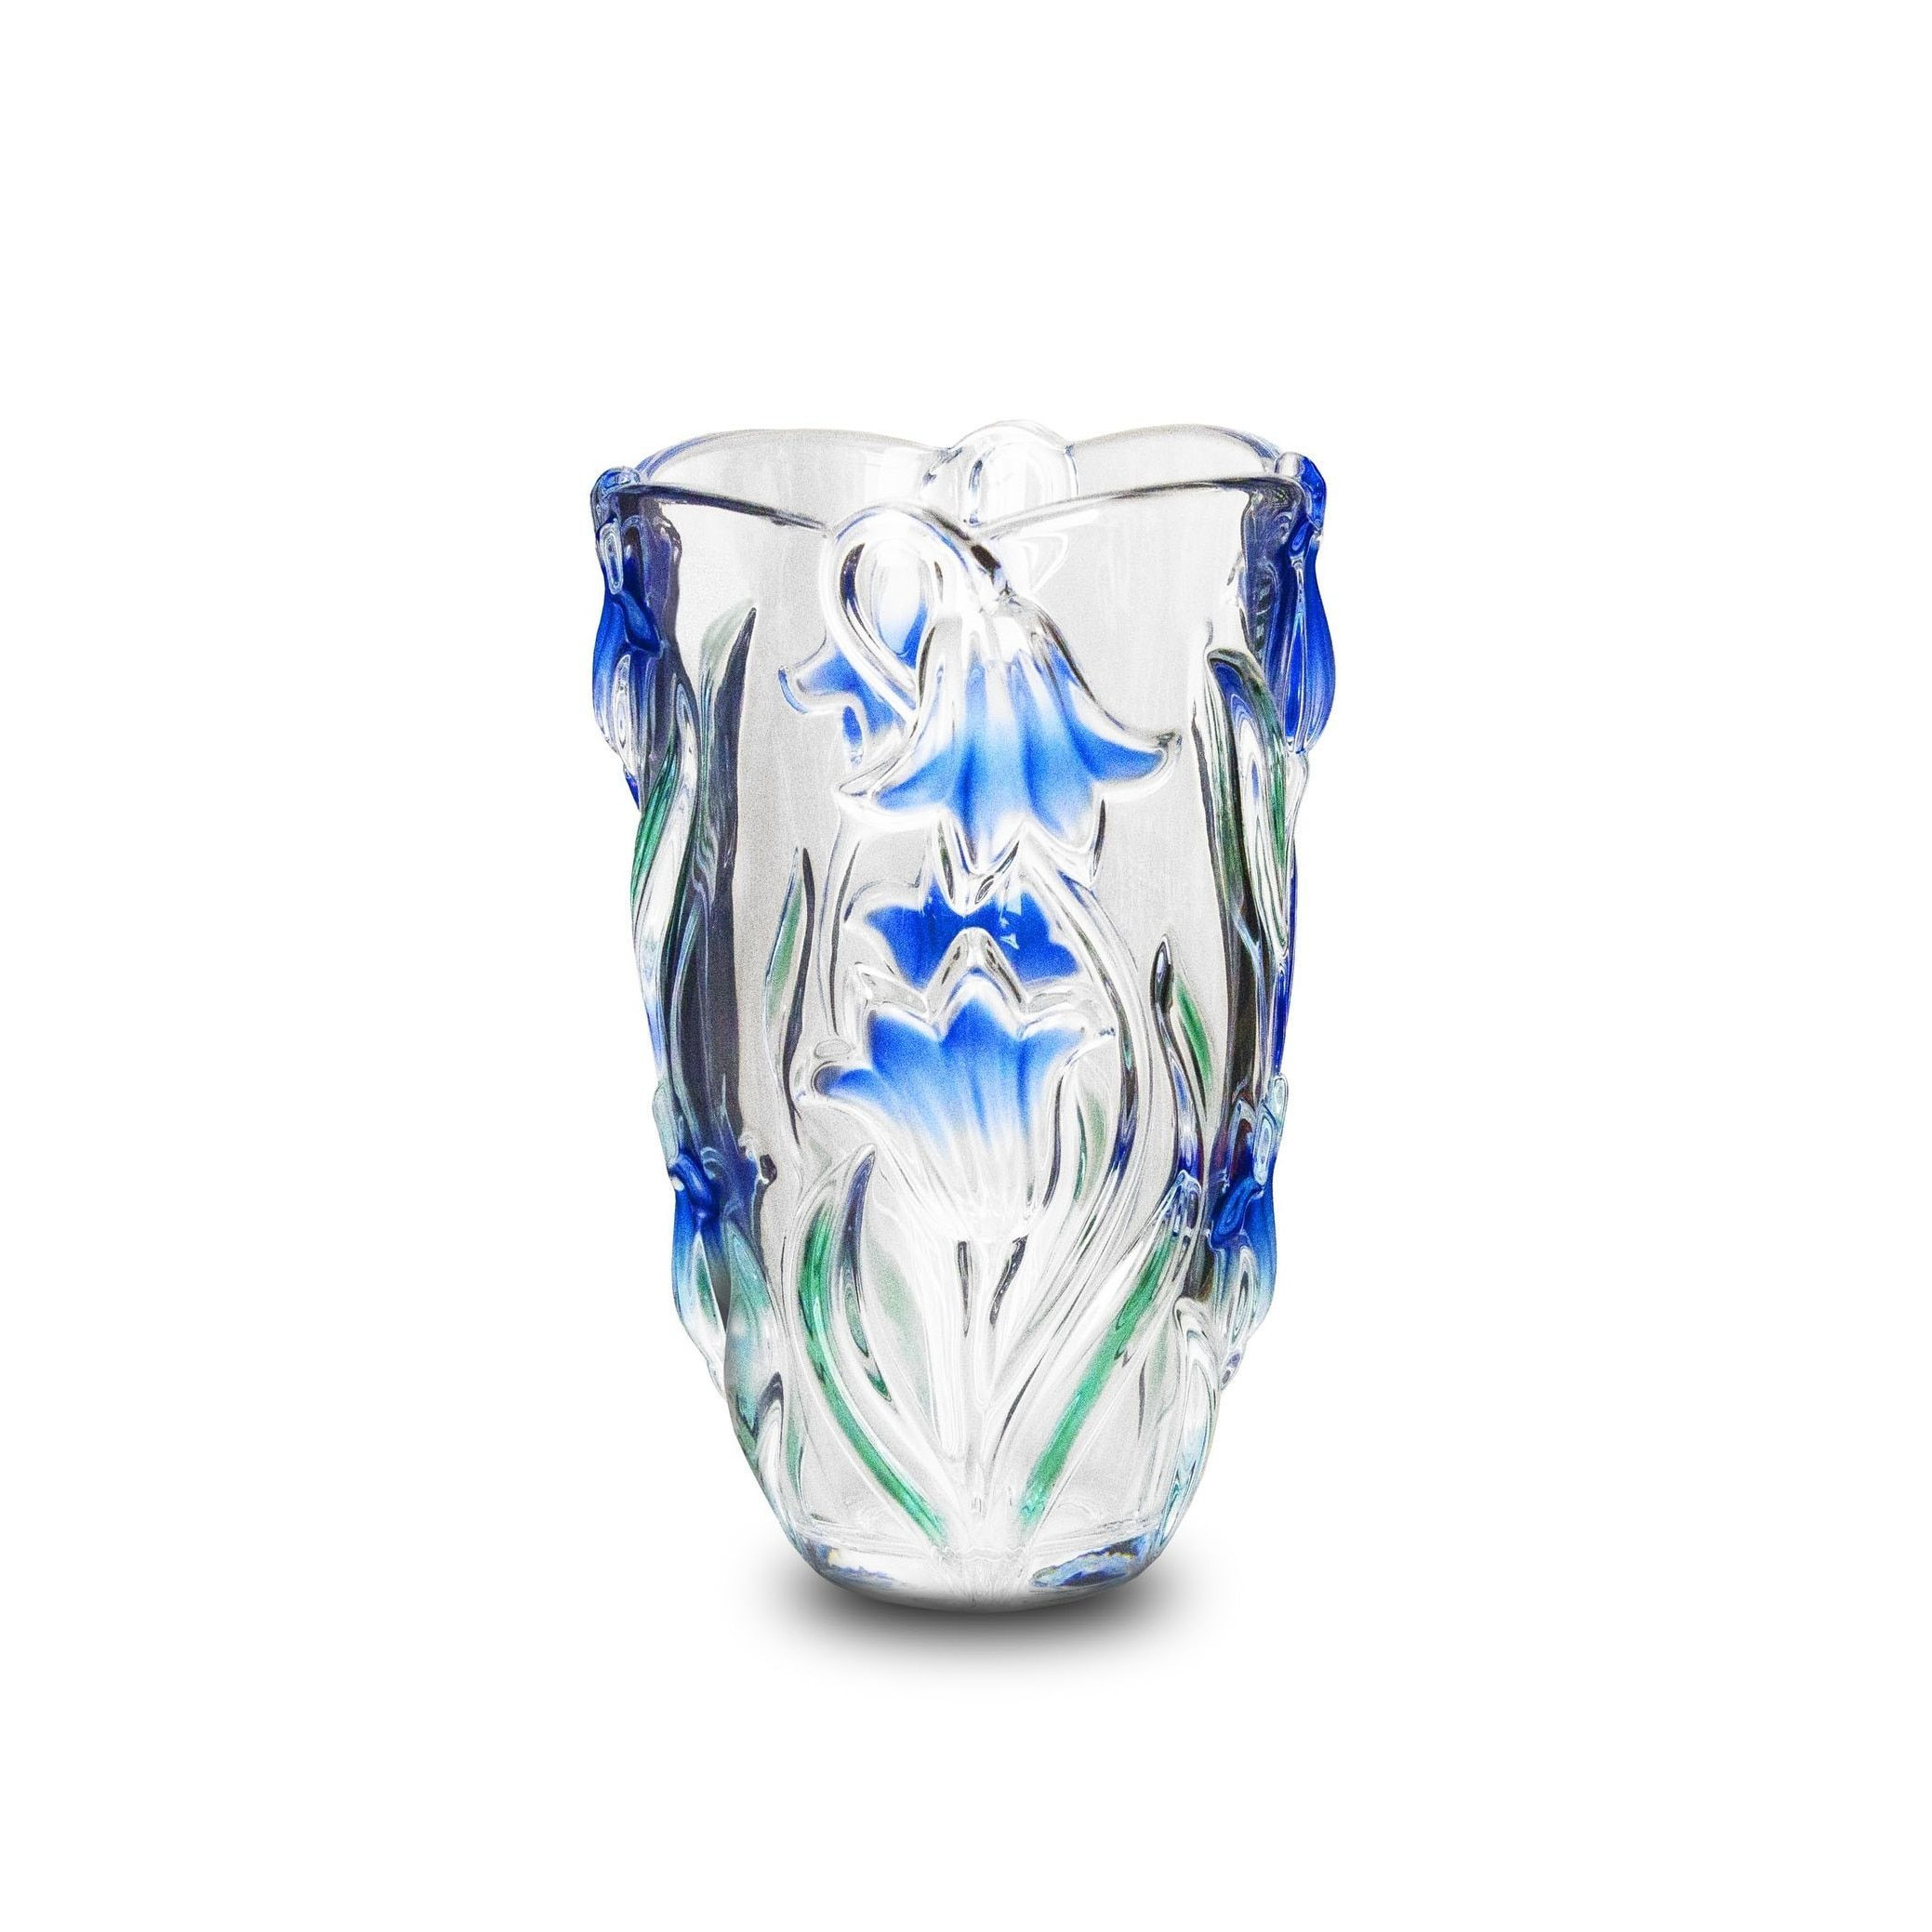 william yeoward vase of 21 crystal glass vase the weekly world intended for studio silversmiths blue danube collection crystal vase